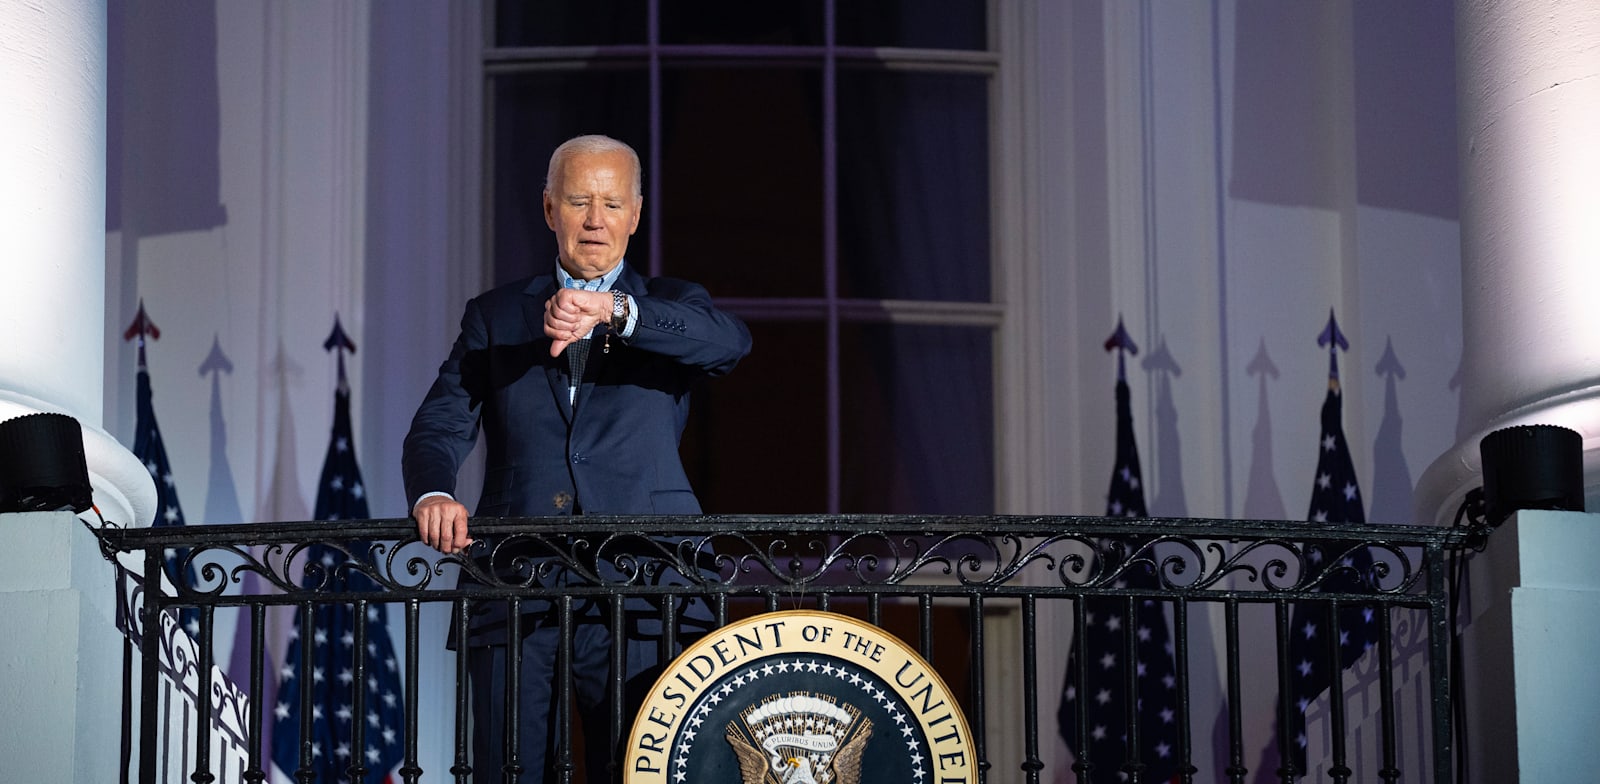 Joe Biden: “Oh come on, critics have no idea what they’re talking about”